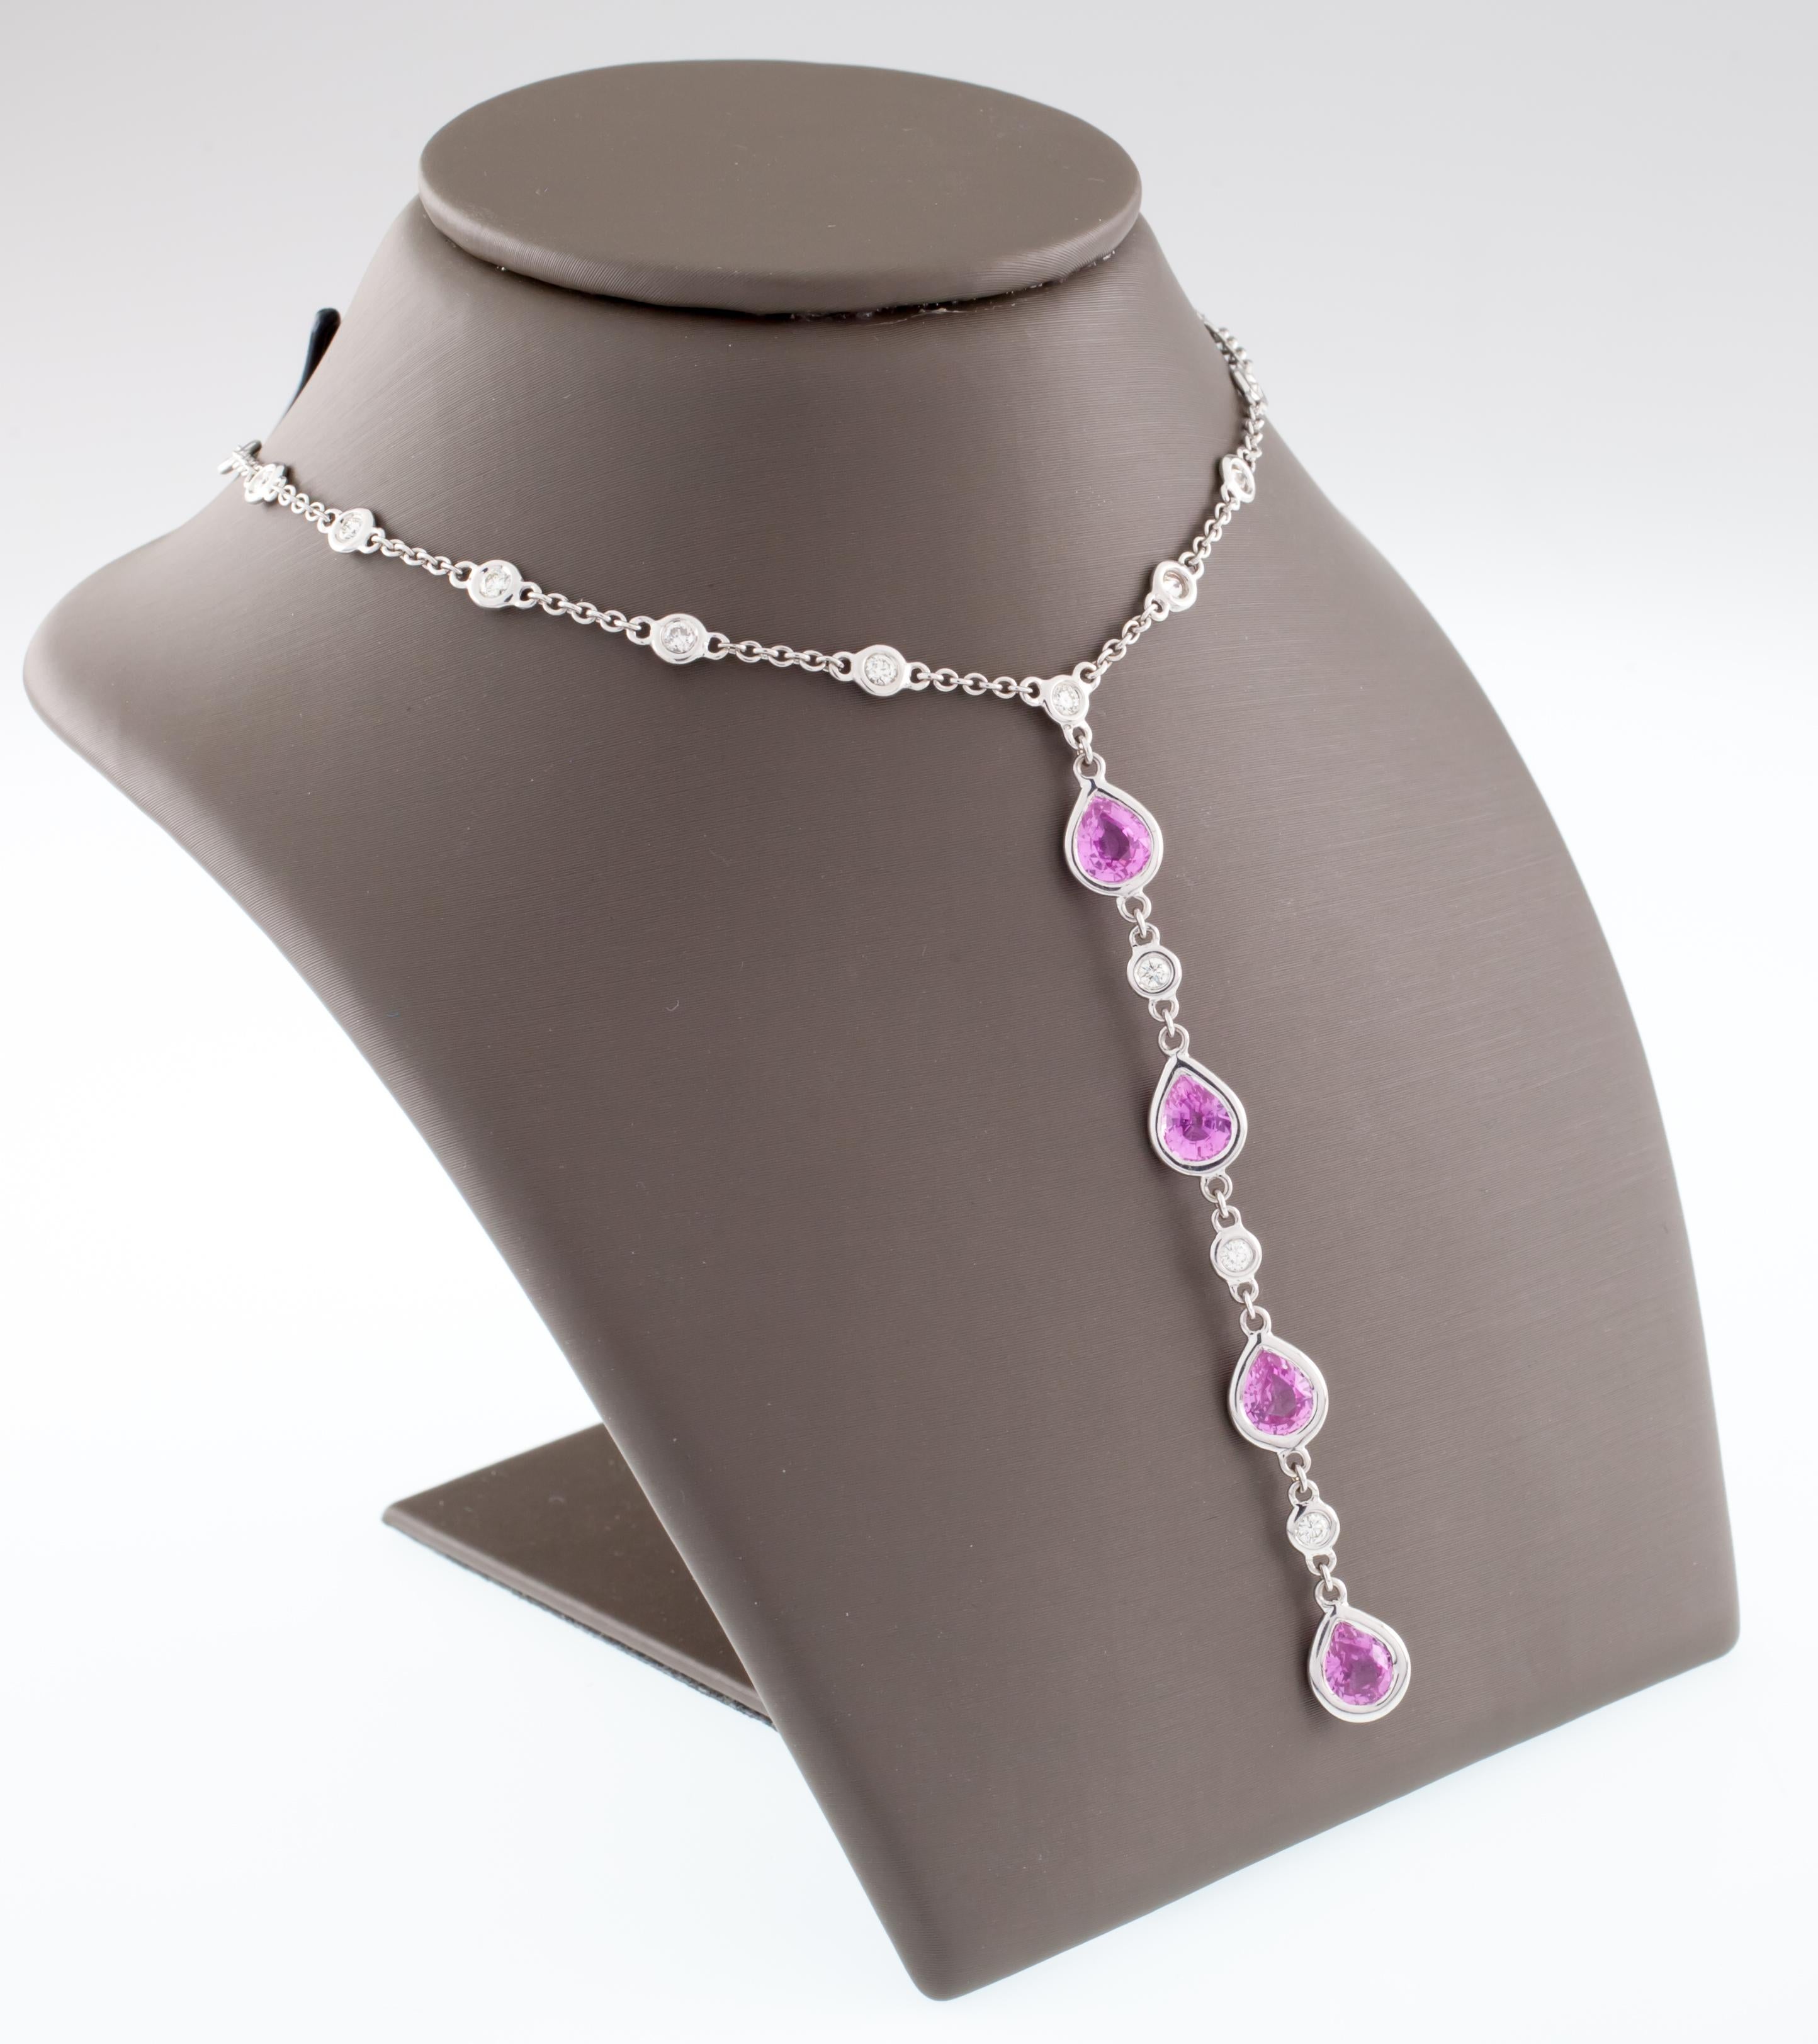 Modern 4.2 Carat Diamond and Pink Sapphire White Gold Necklace with Drop Pendant For Sale